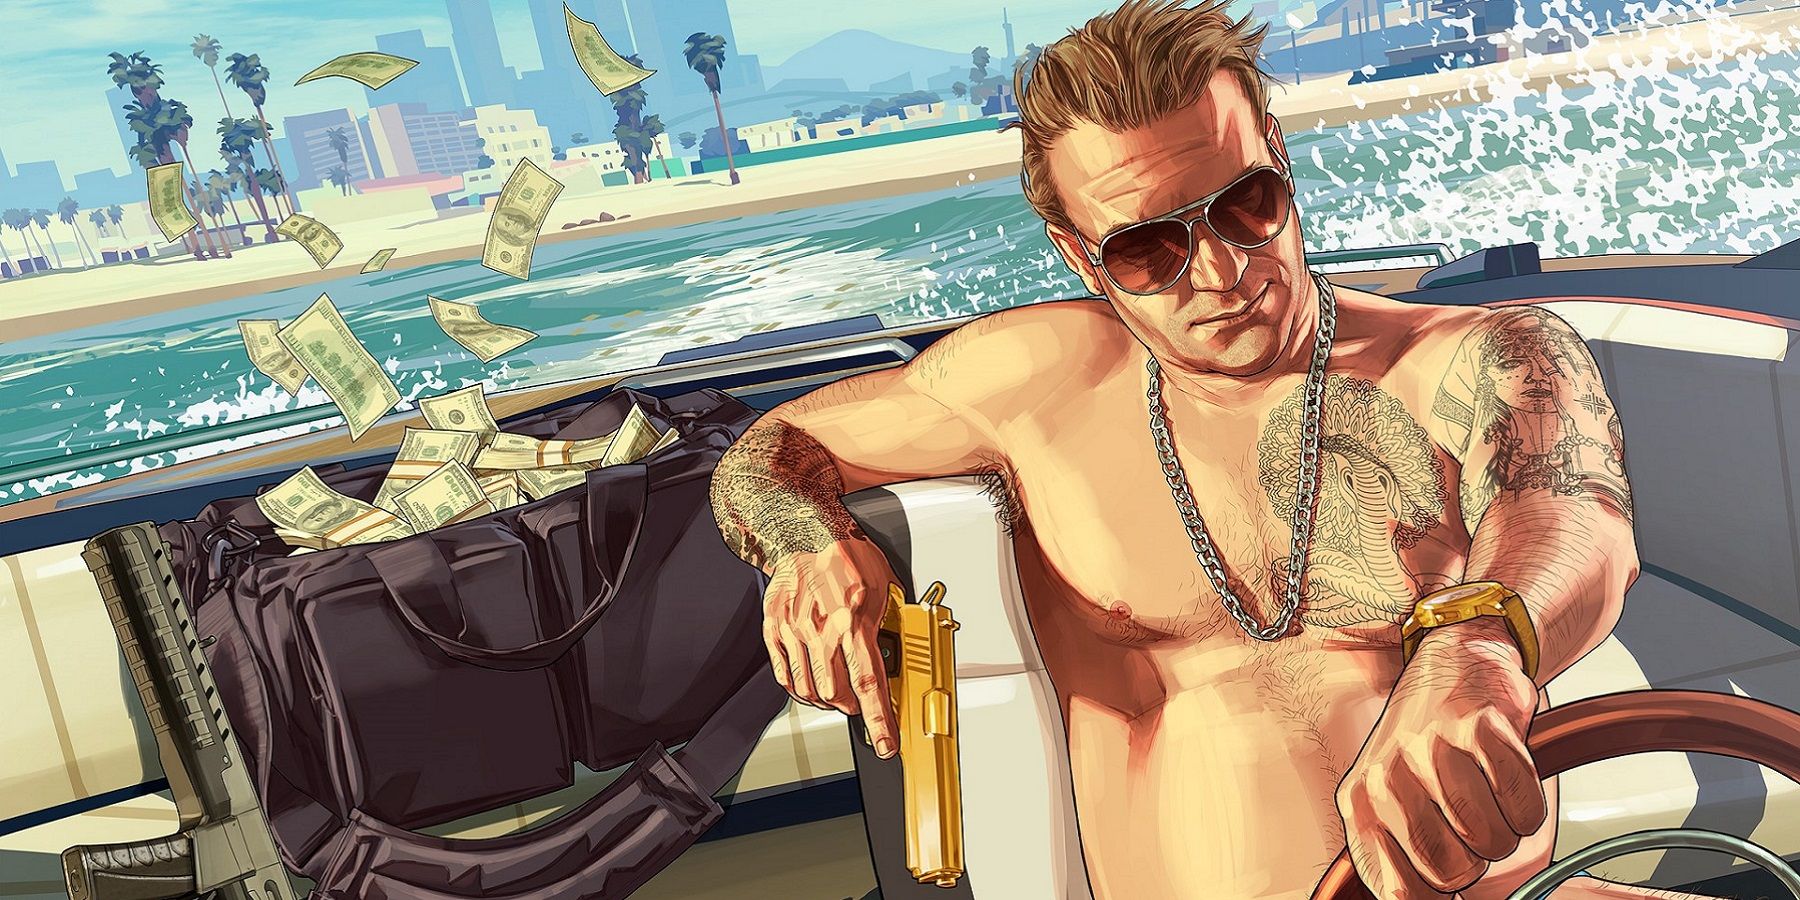 A potential Grand Theft Auto image which shows a shirtless guy getting away in a speedboat.